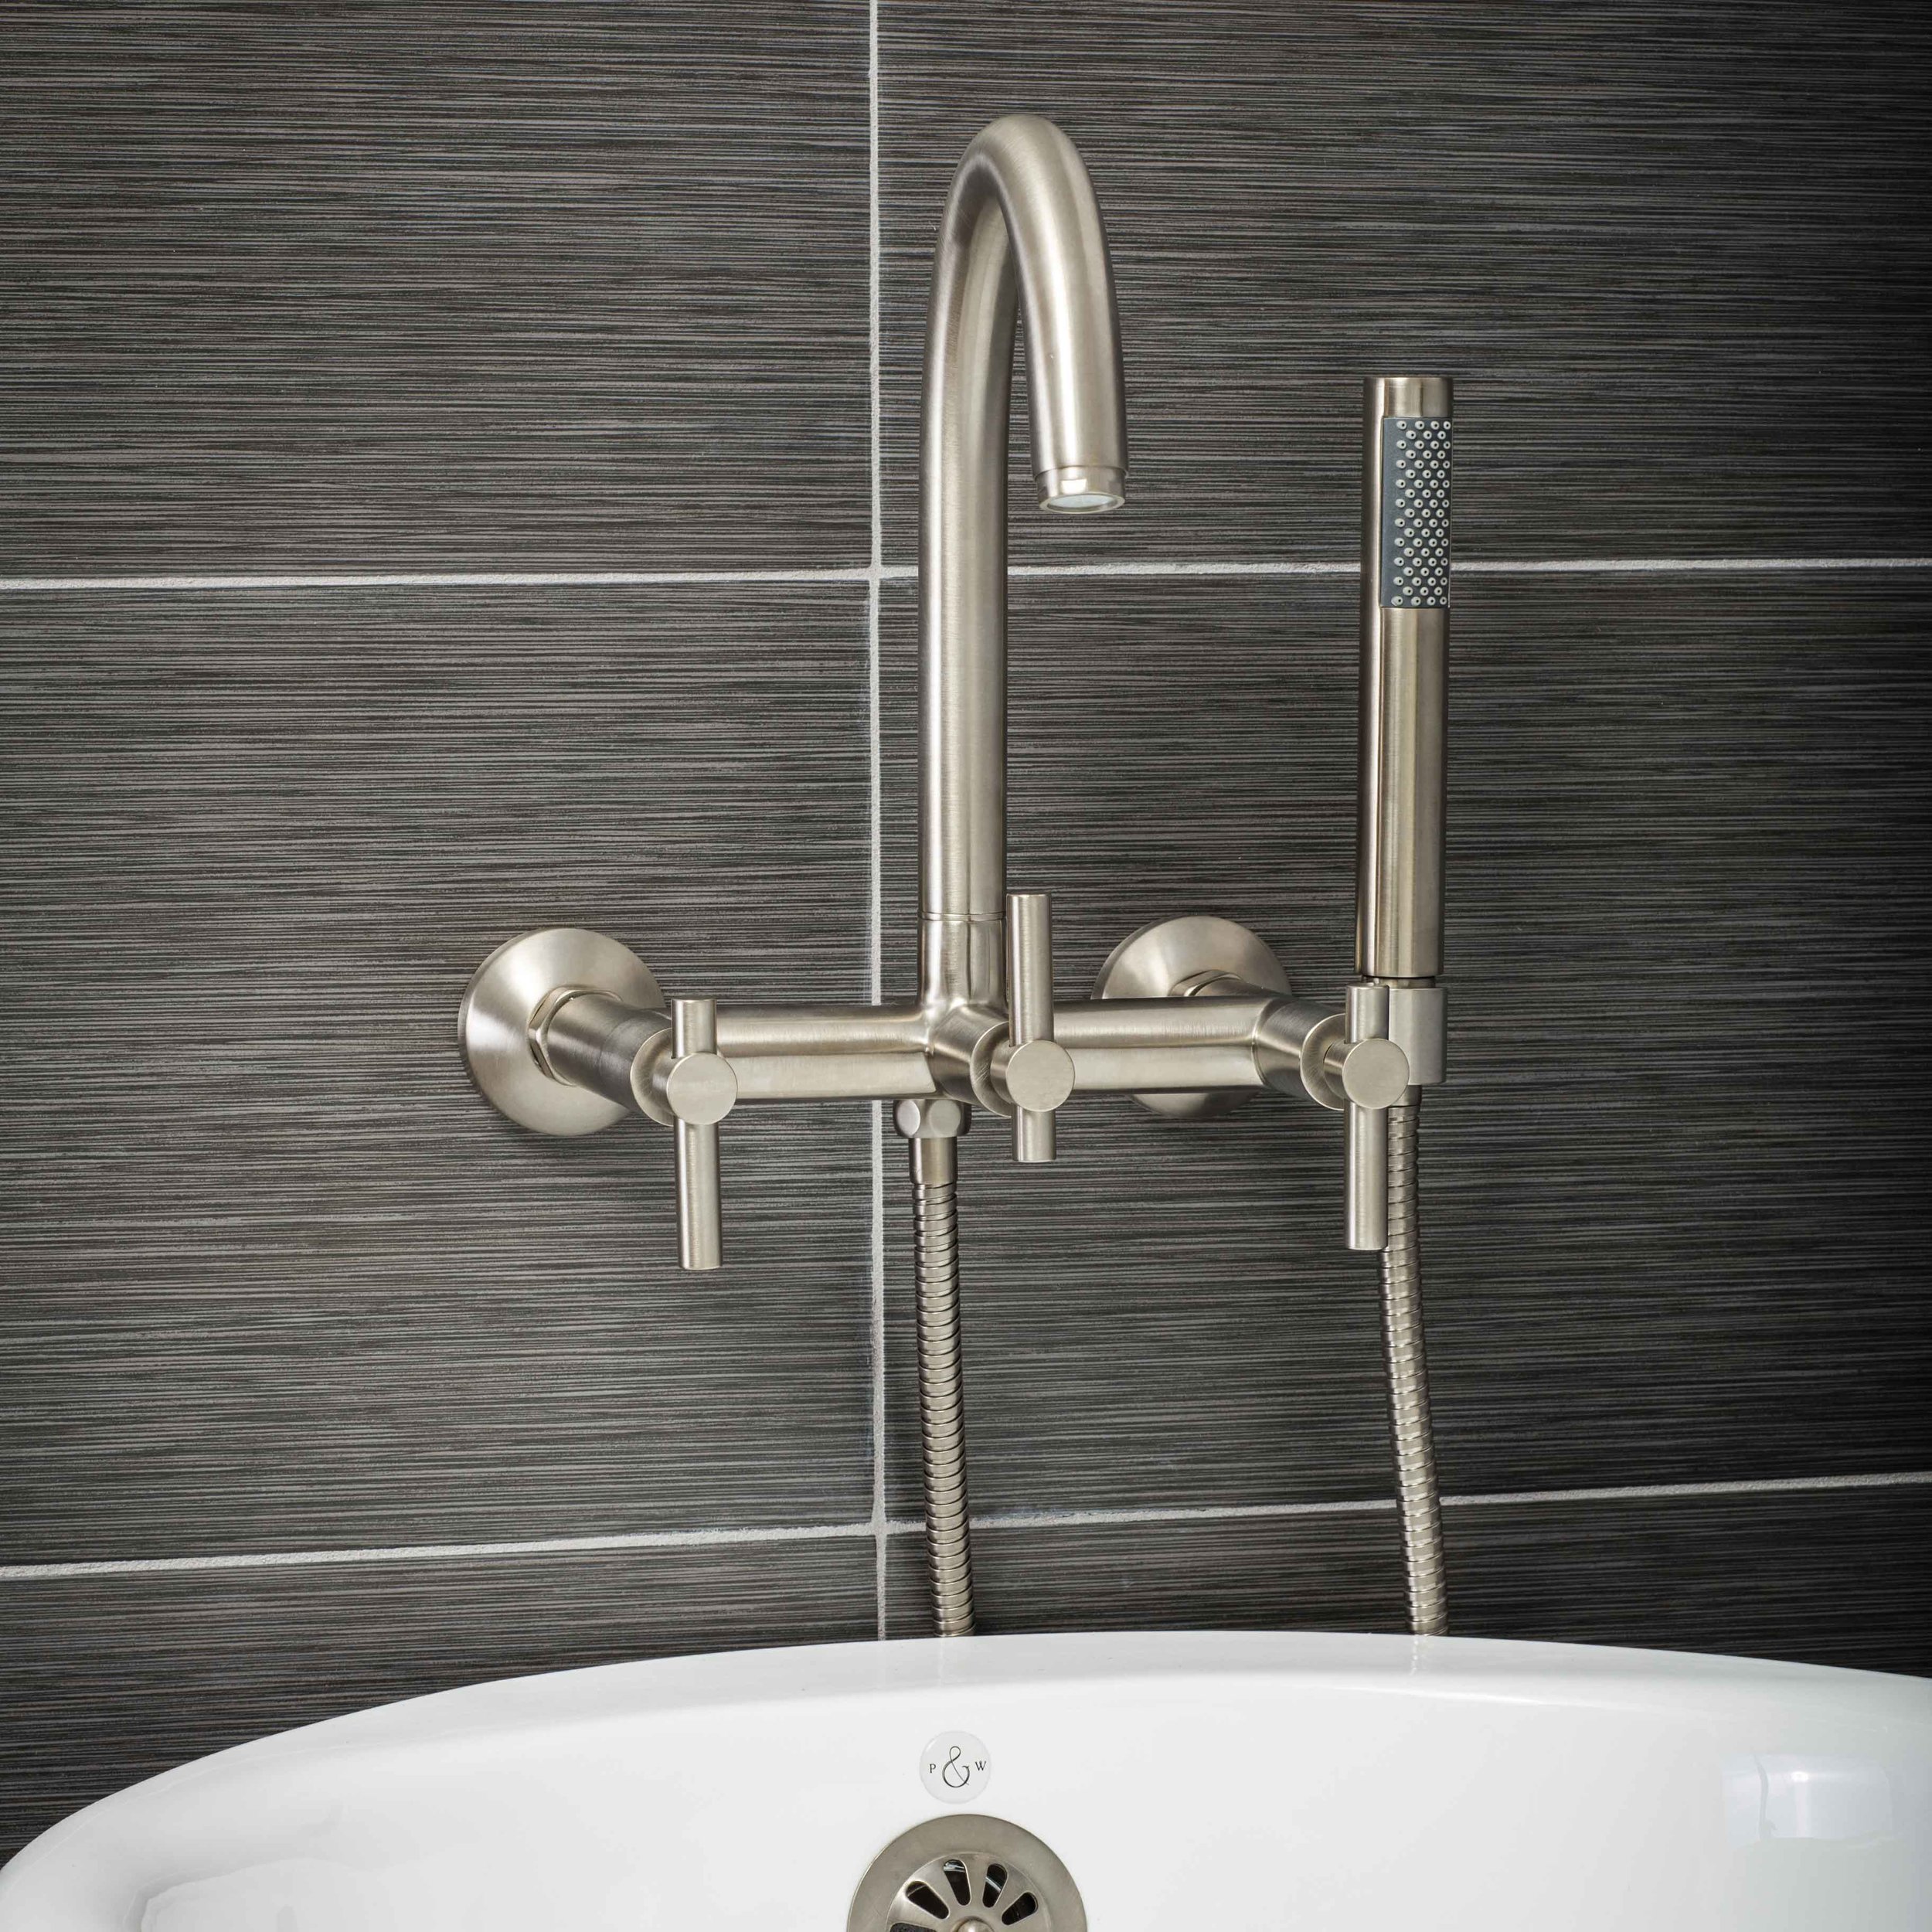 Contemporary Wall Mount Tub Filler Faucet in Brushed Nickel with Levers —  Pelham and White